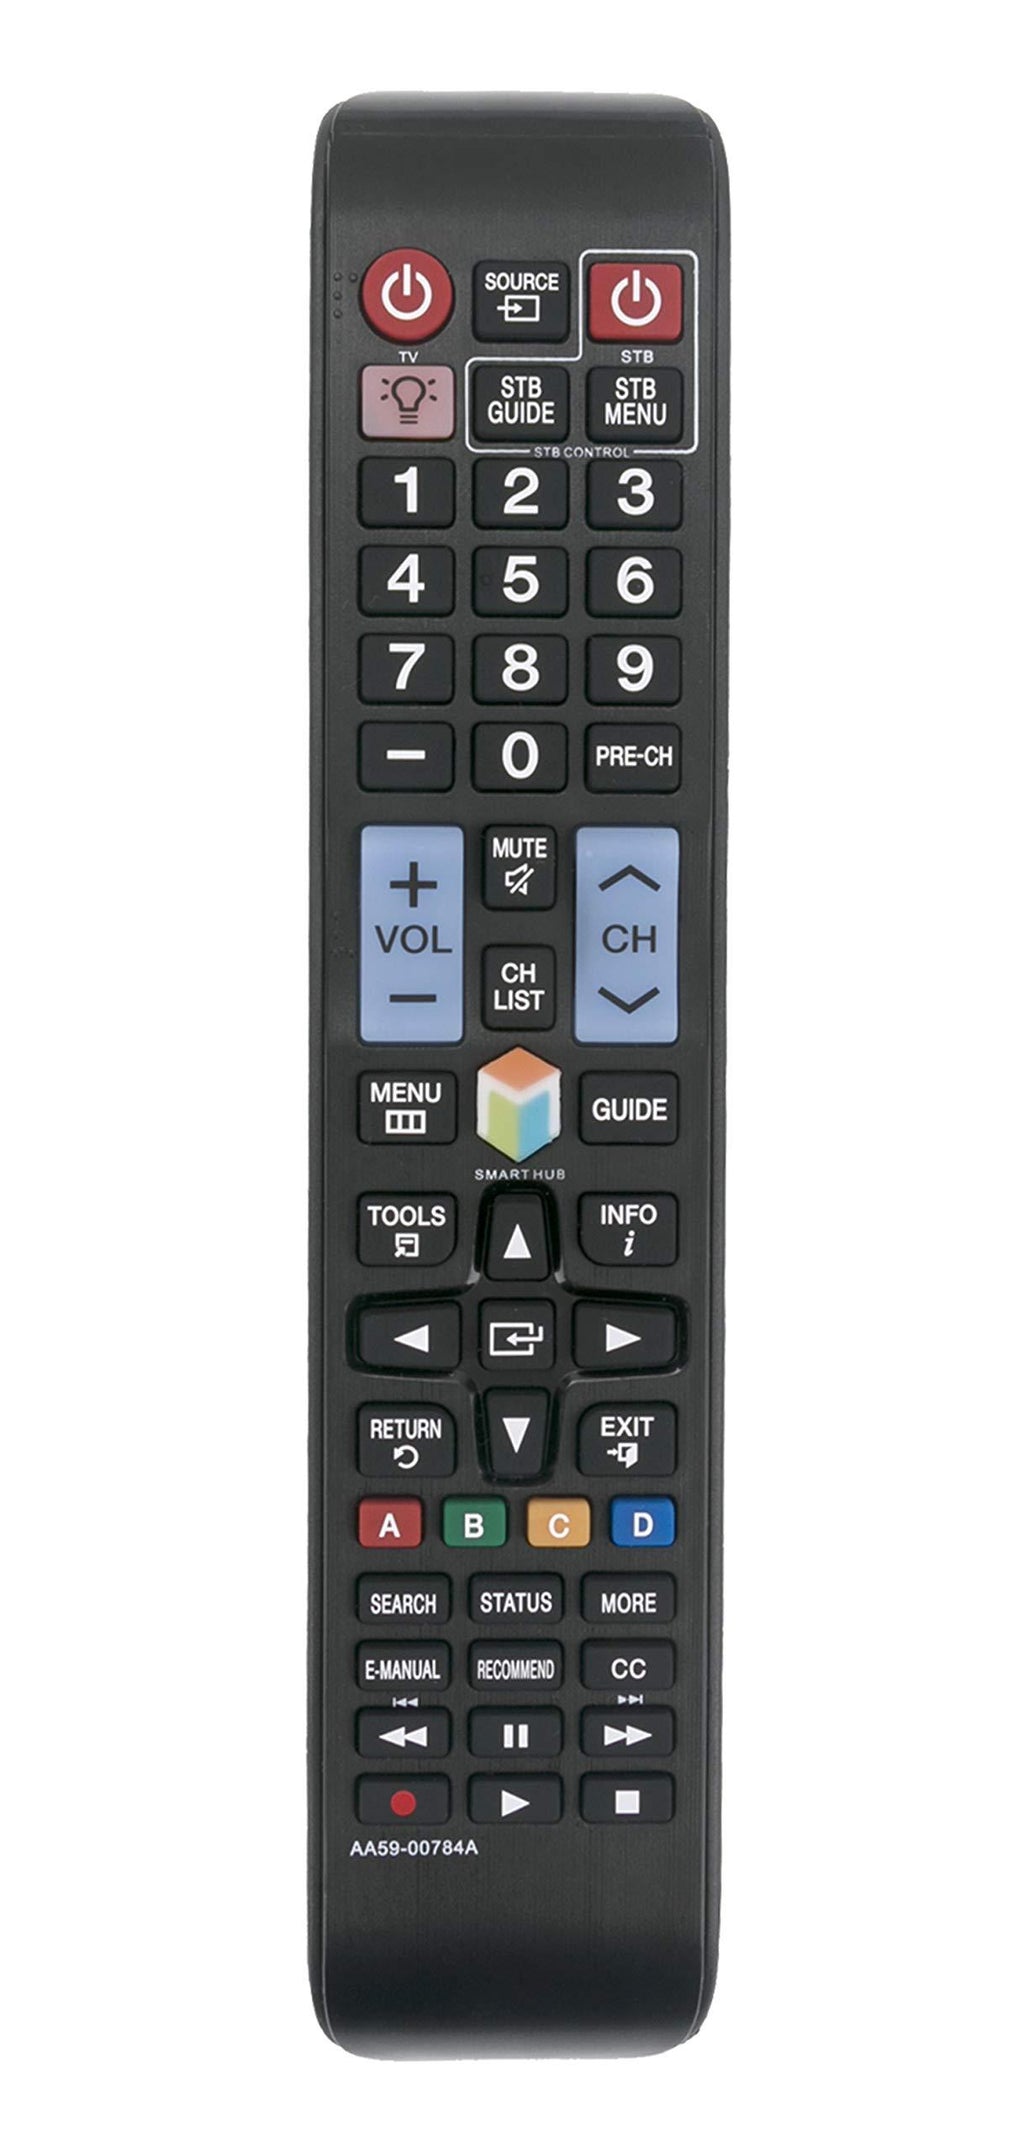 New AA59-00784A Replace Remote fit for Samsung TV UN32F5500 UN40F5500 UN46F5500 UN50F5500 UN32F5500AFXZA UN32F6300 UN32F6300AFXZA UN32F6350A UN32F6350AF UN46F6300AF UN40F6300AF UN32F6300AF UN46F5500AF